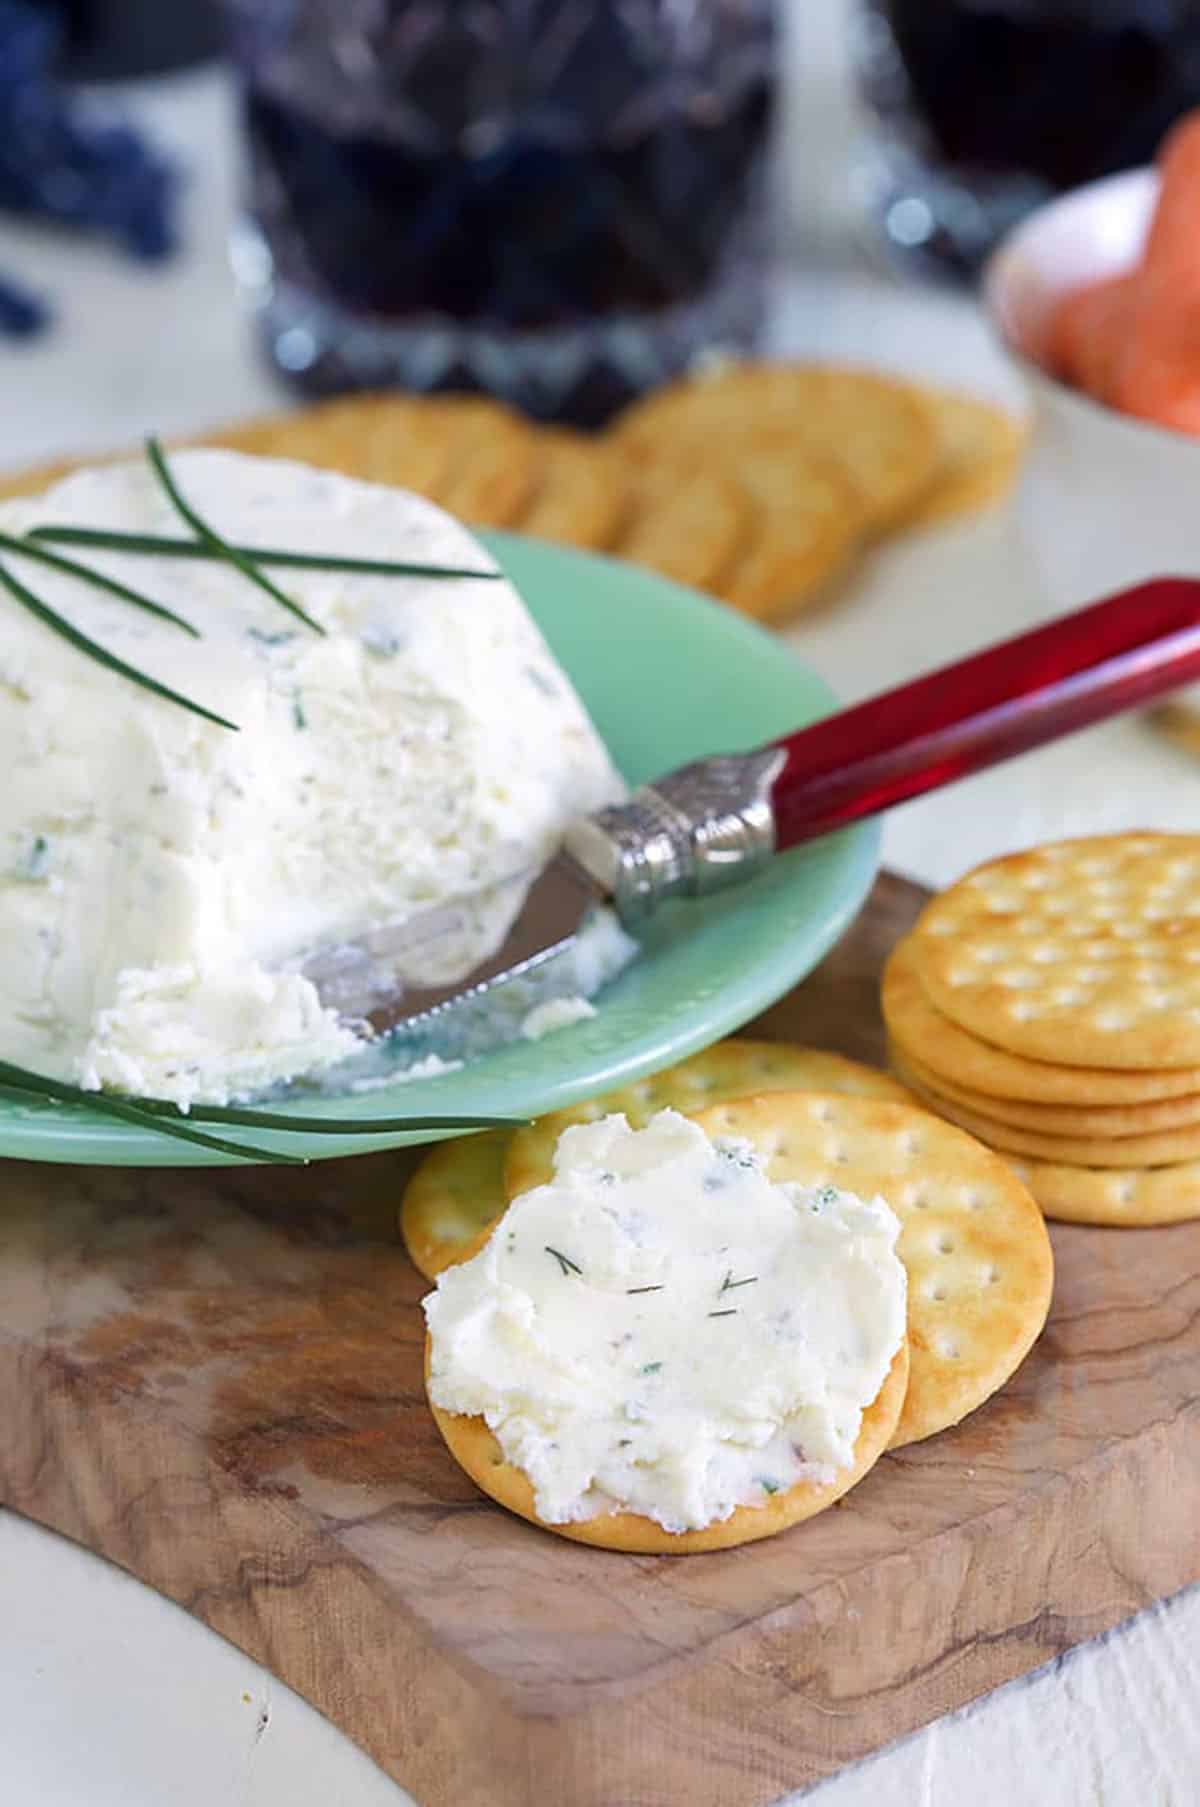 White creamy Boursin cheese is spread on a cracker.